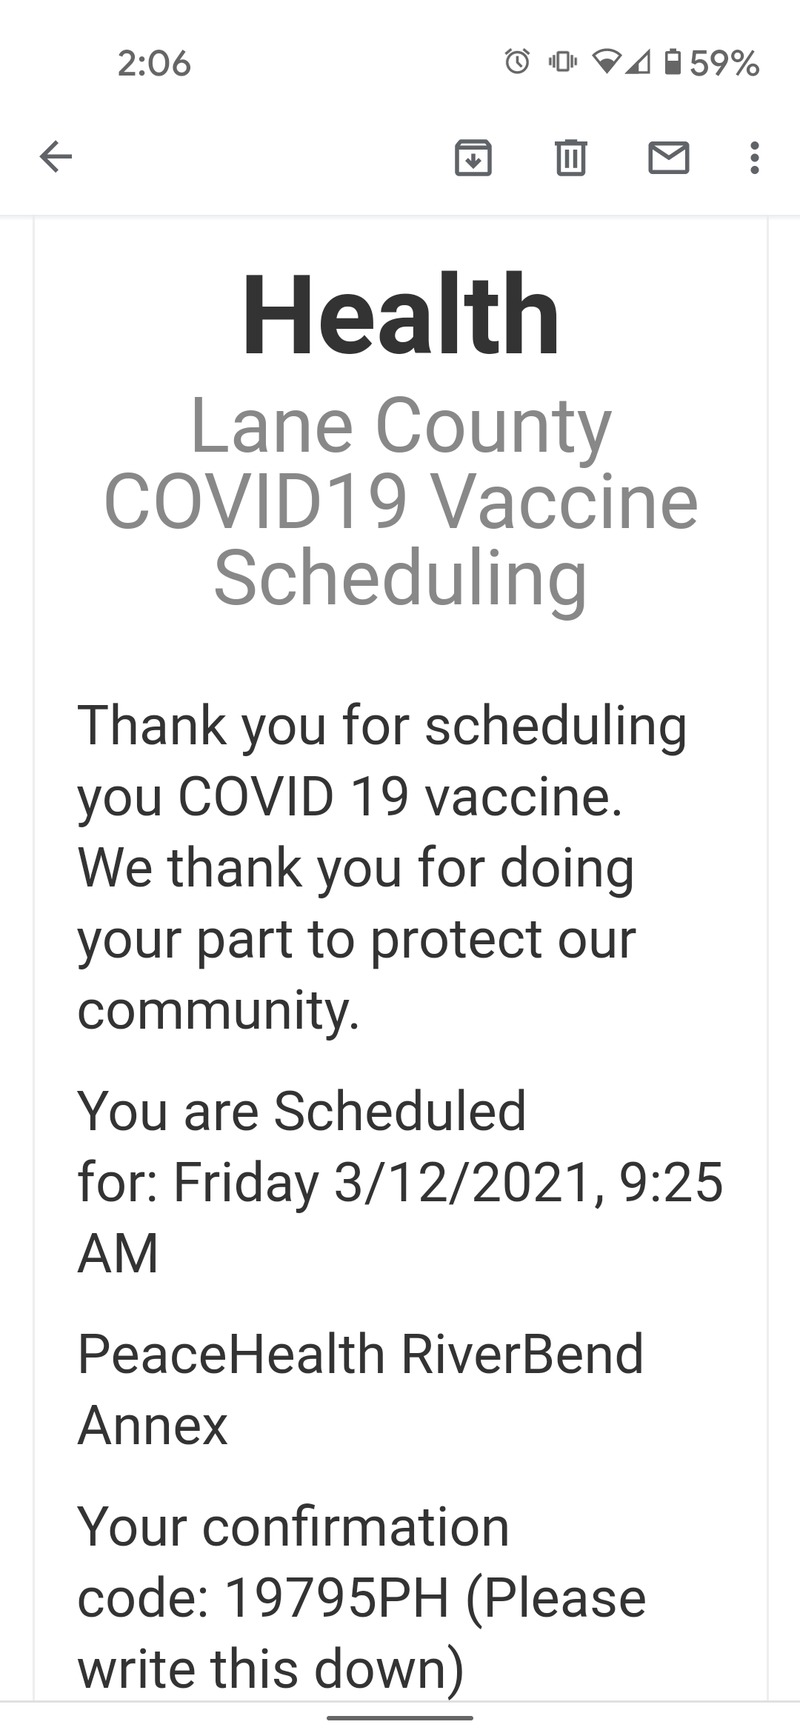 We got the Pfizer #1 vaccine Friday morning.